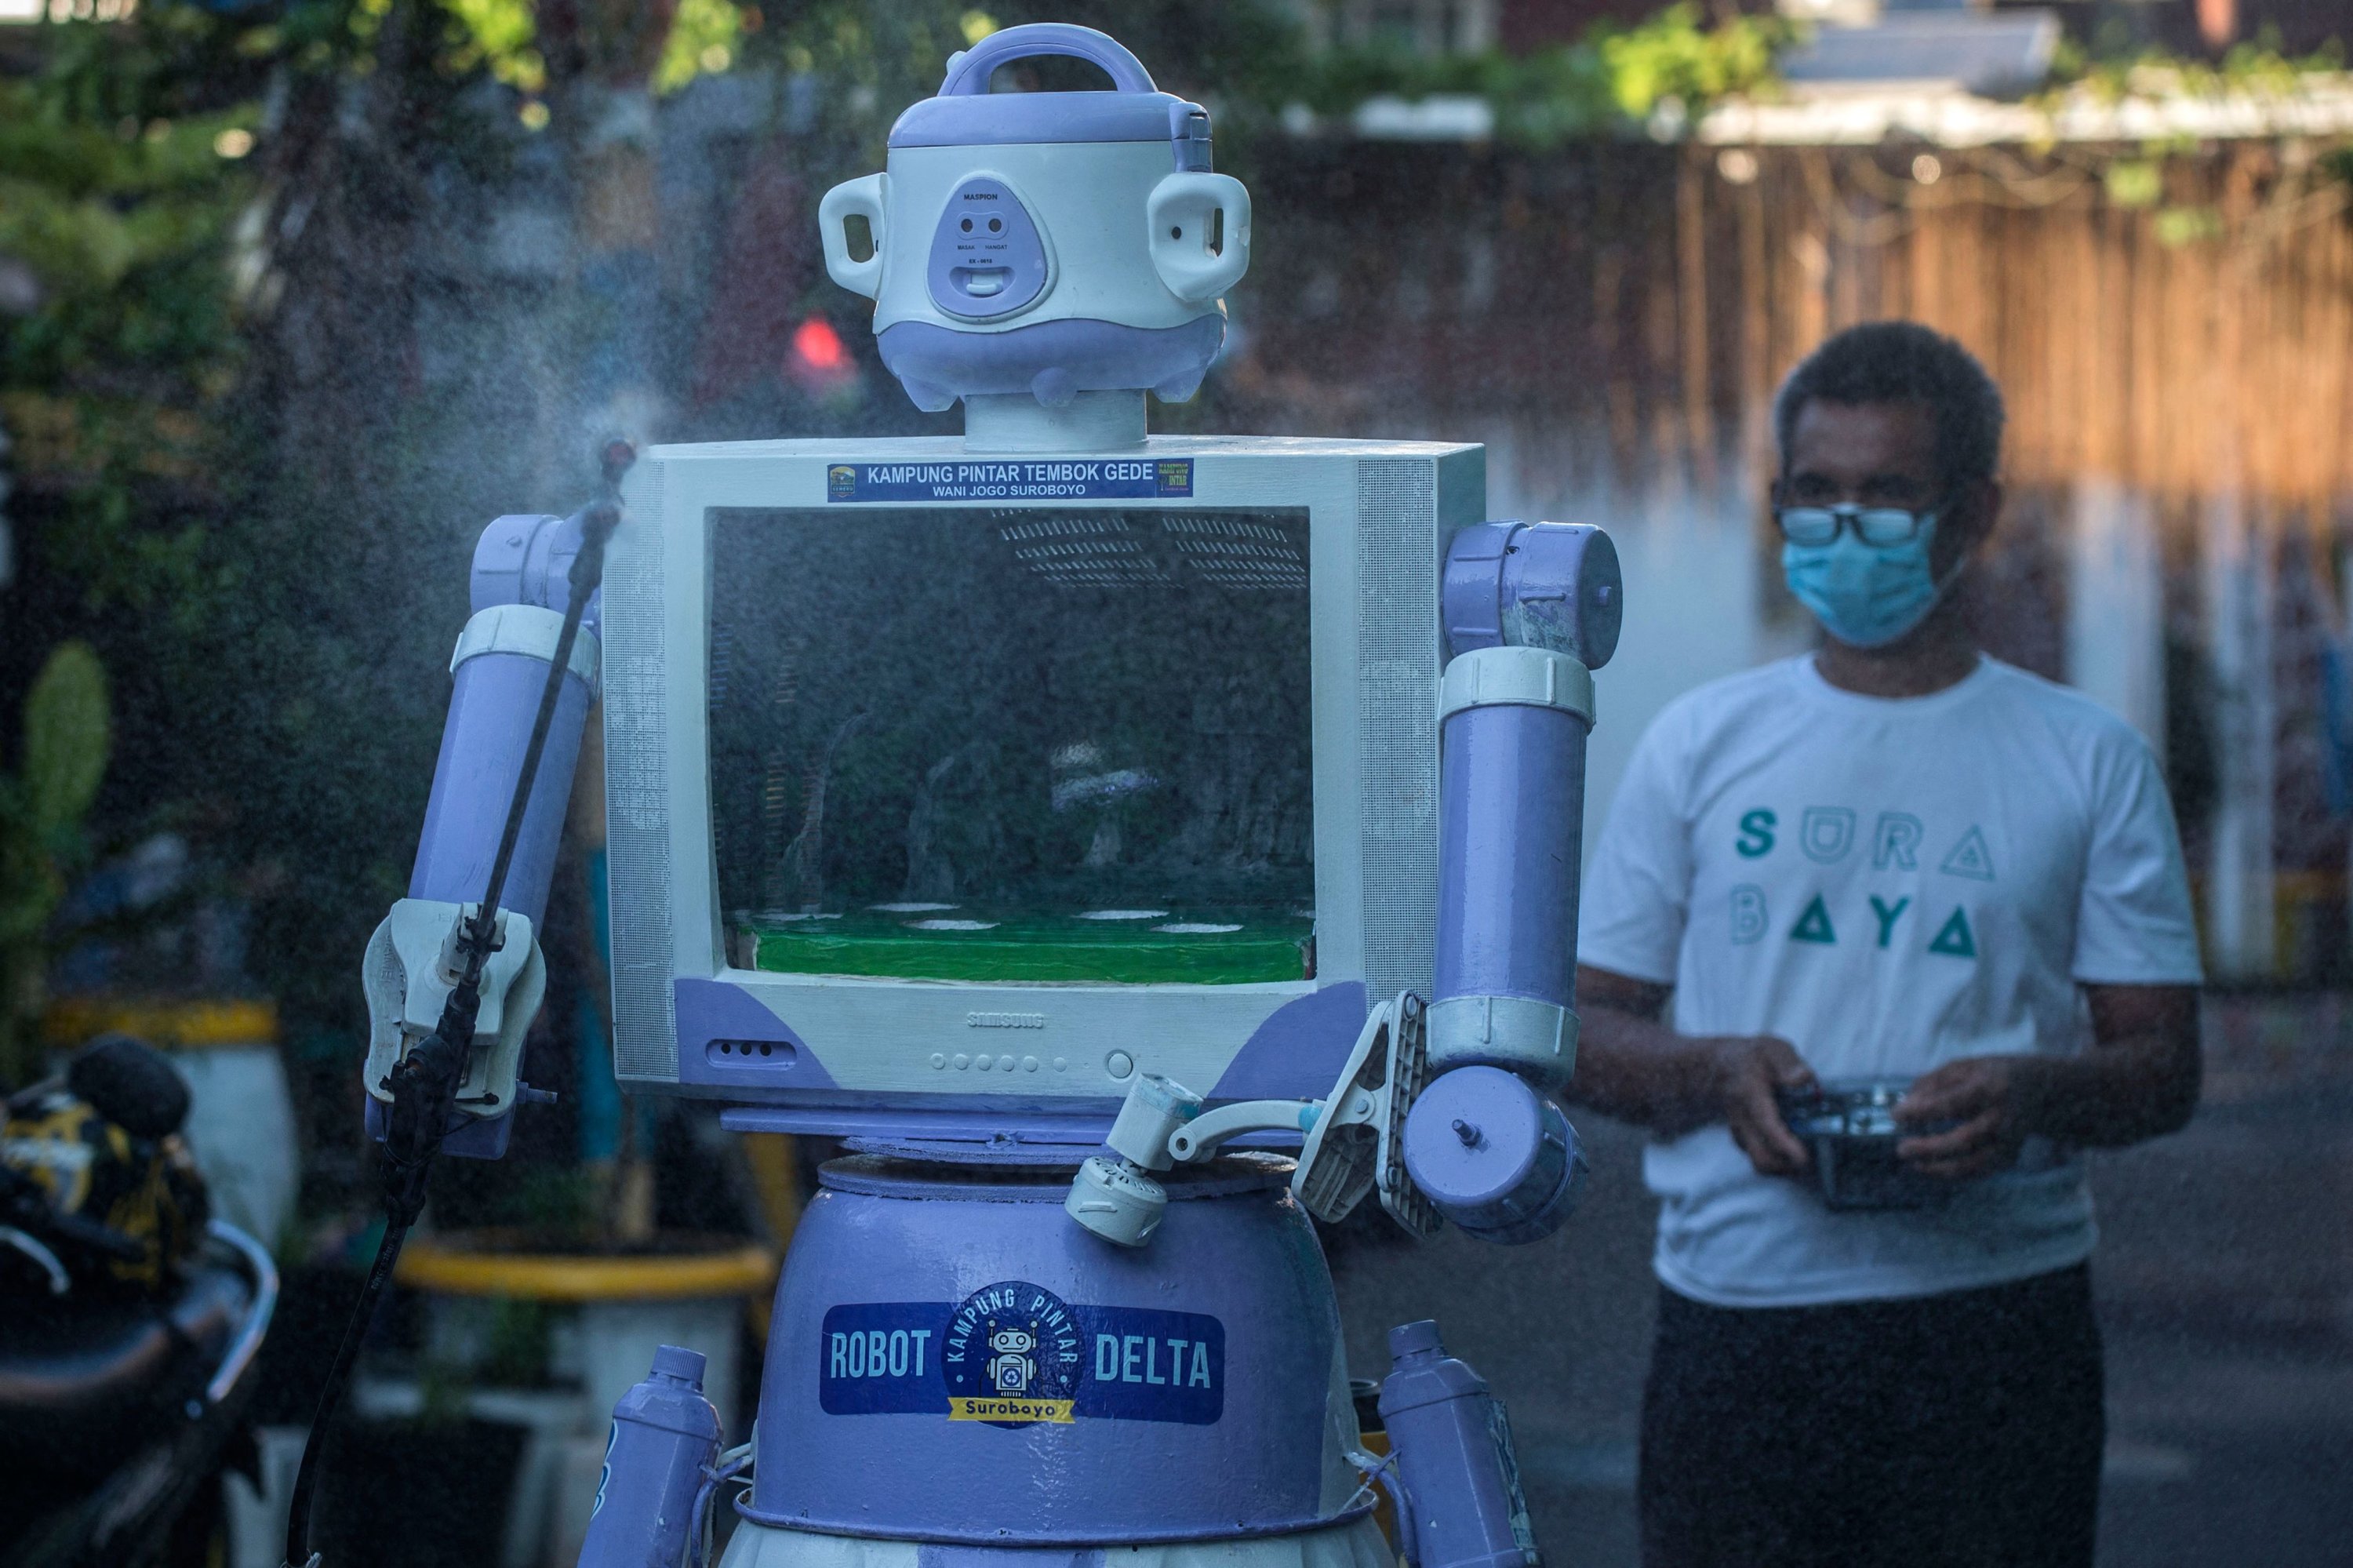 Aseyanto, who goes by one name only, operates a disinfection robot named Delta, which he created from recycled household goods, at a neighborhood in Surabaya, East Java province, Indonesia, on July 28, 2021. (AFP Photo)